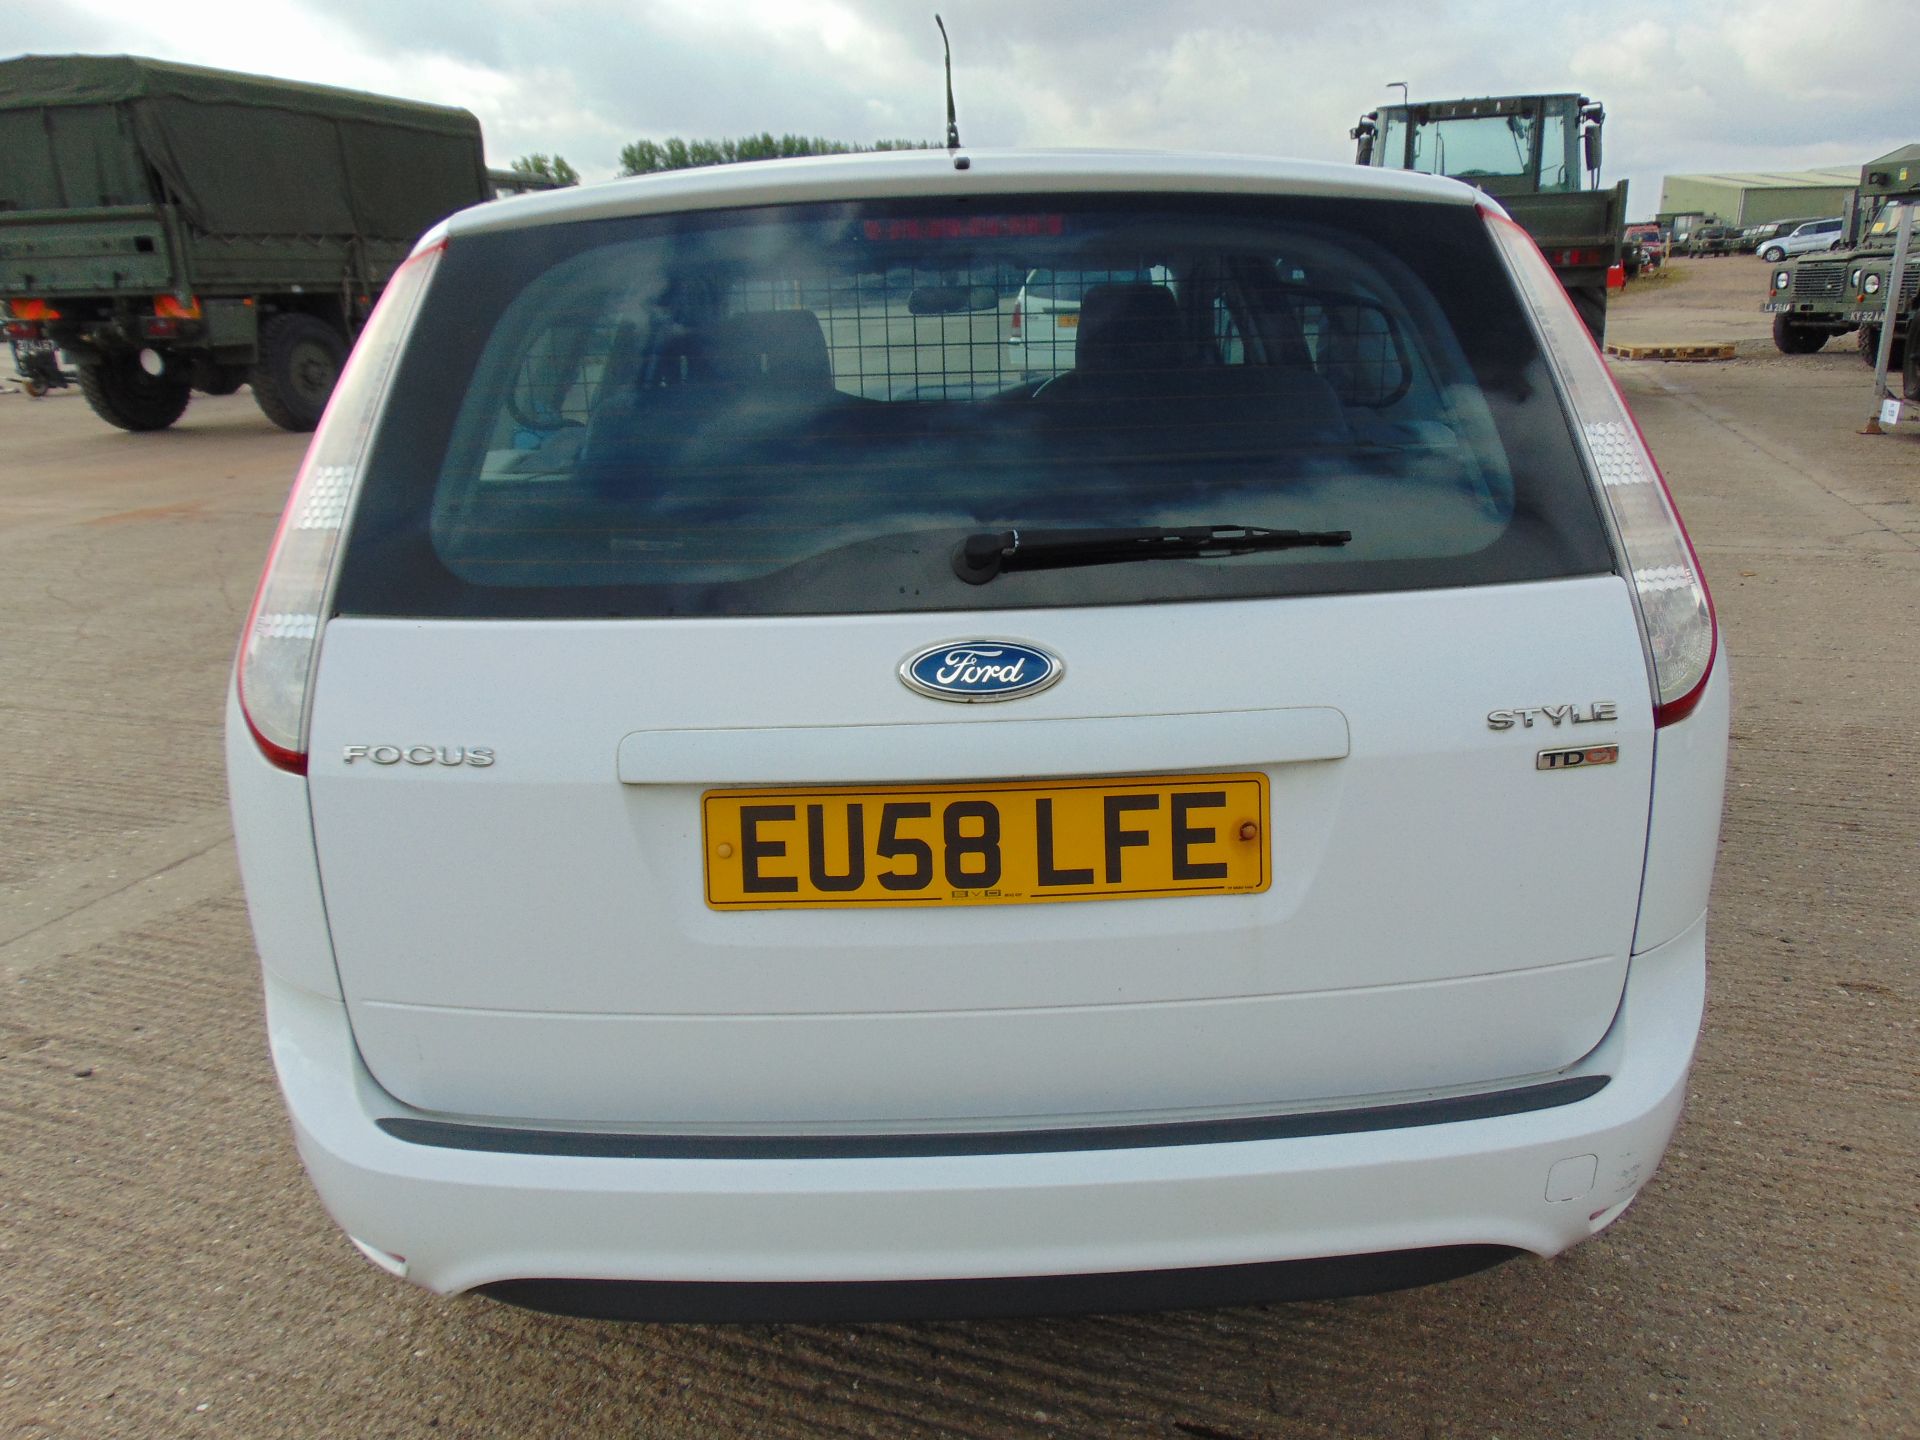 2009 Ford Focus Style 1.8l TDi Estate - Image 7 of 15